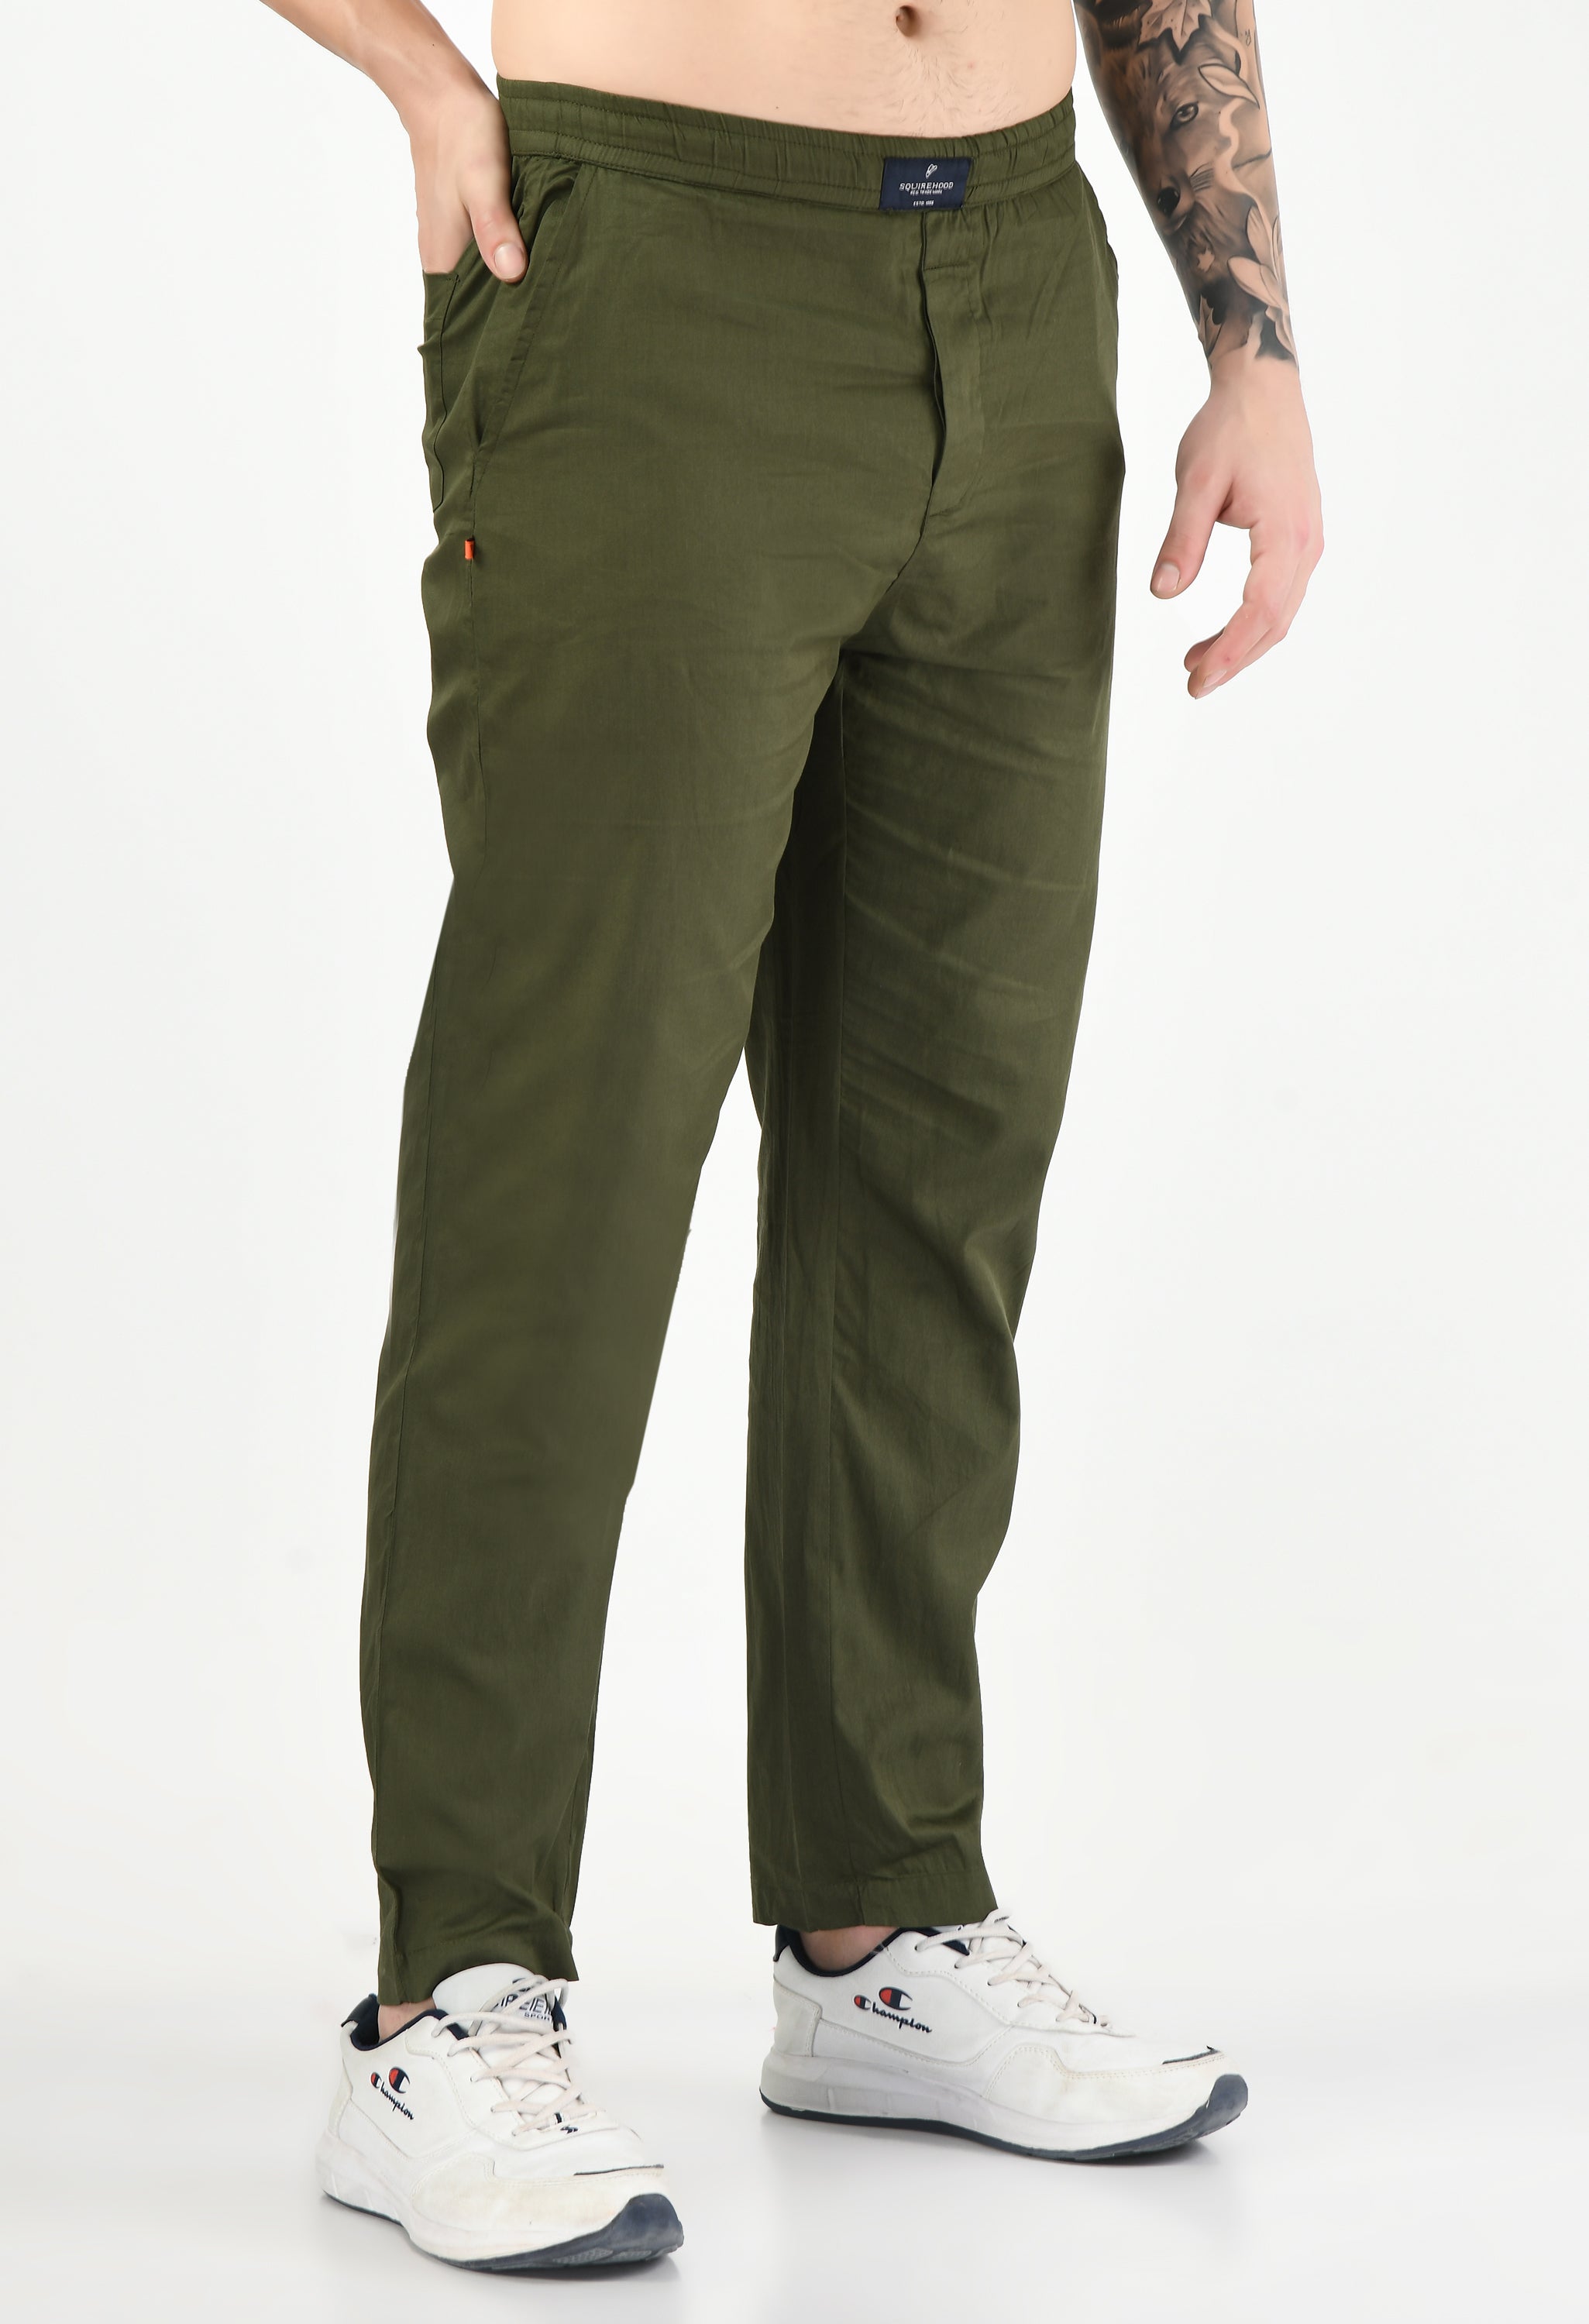 Olive Solid Cotton Twill Men's Trouser - SQUIREHOOD